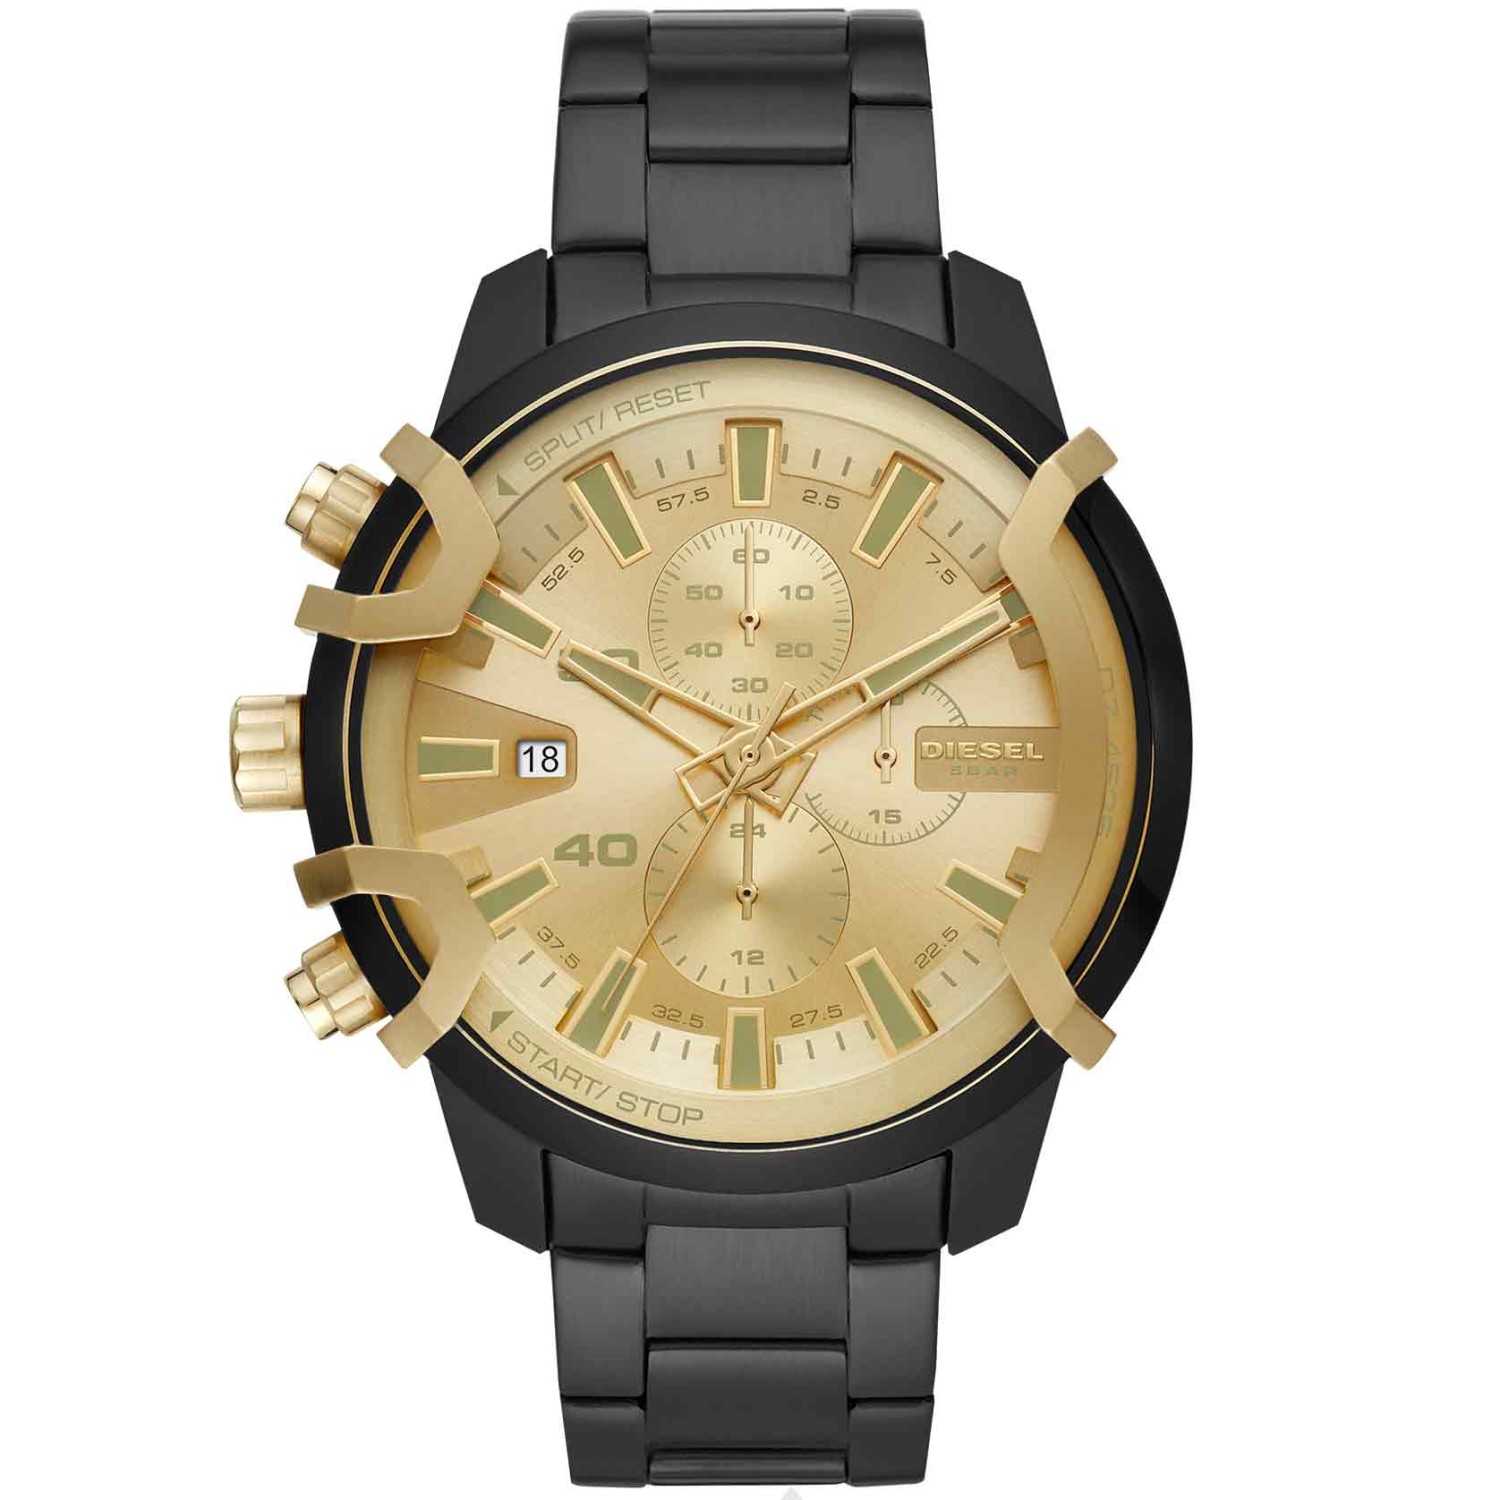 DZ4525 Diesel Griffed Chronograph Black Watch. This 48mm Griffed watch features a gold sunray dial, chronograph movement and black stainless steel bracelet Humm -Buy Little things up to $1000 and choose 10 weekly or 5 fortnightly payments with no interest